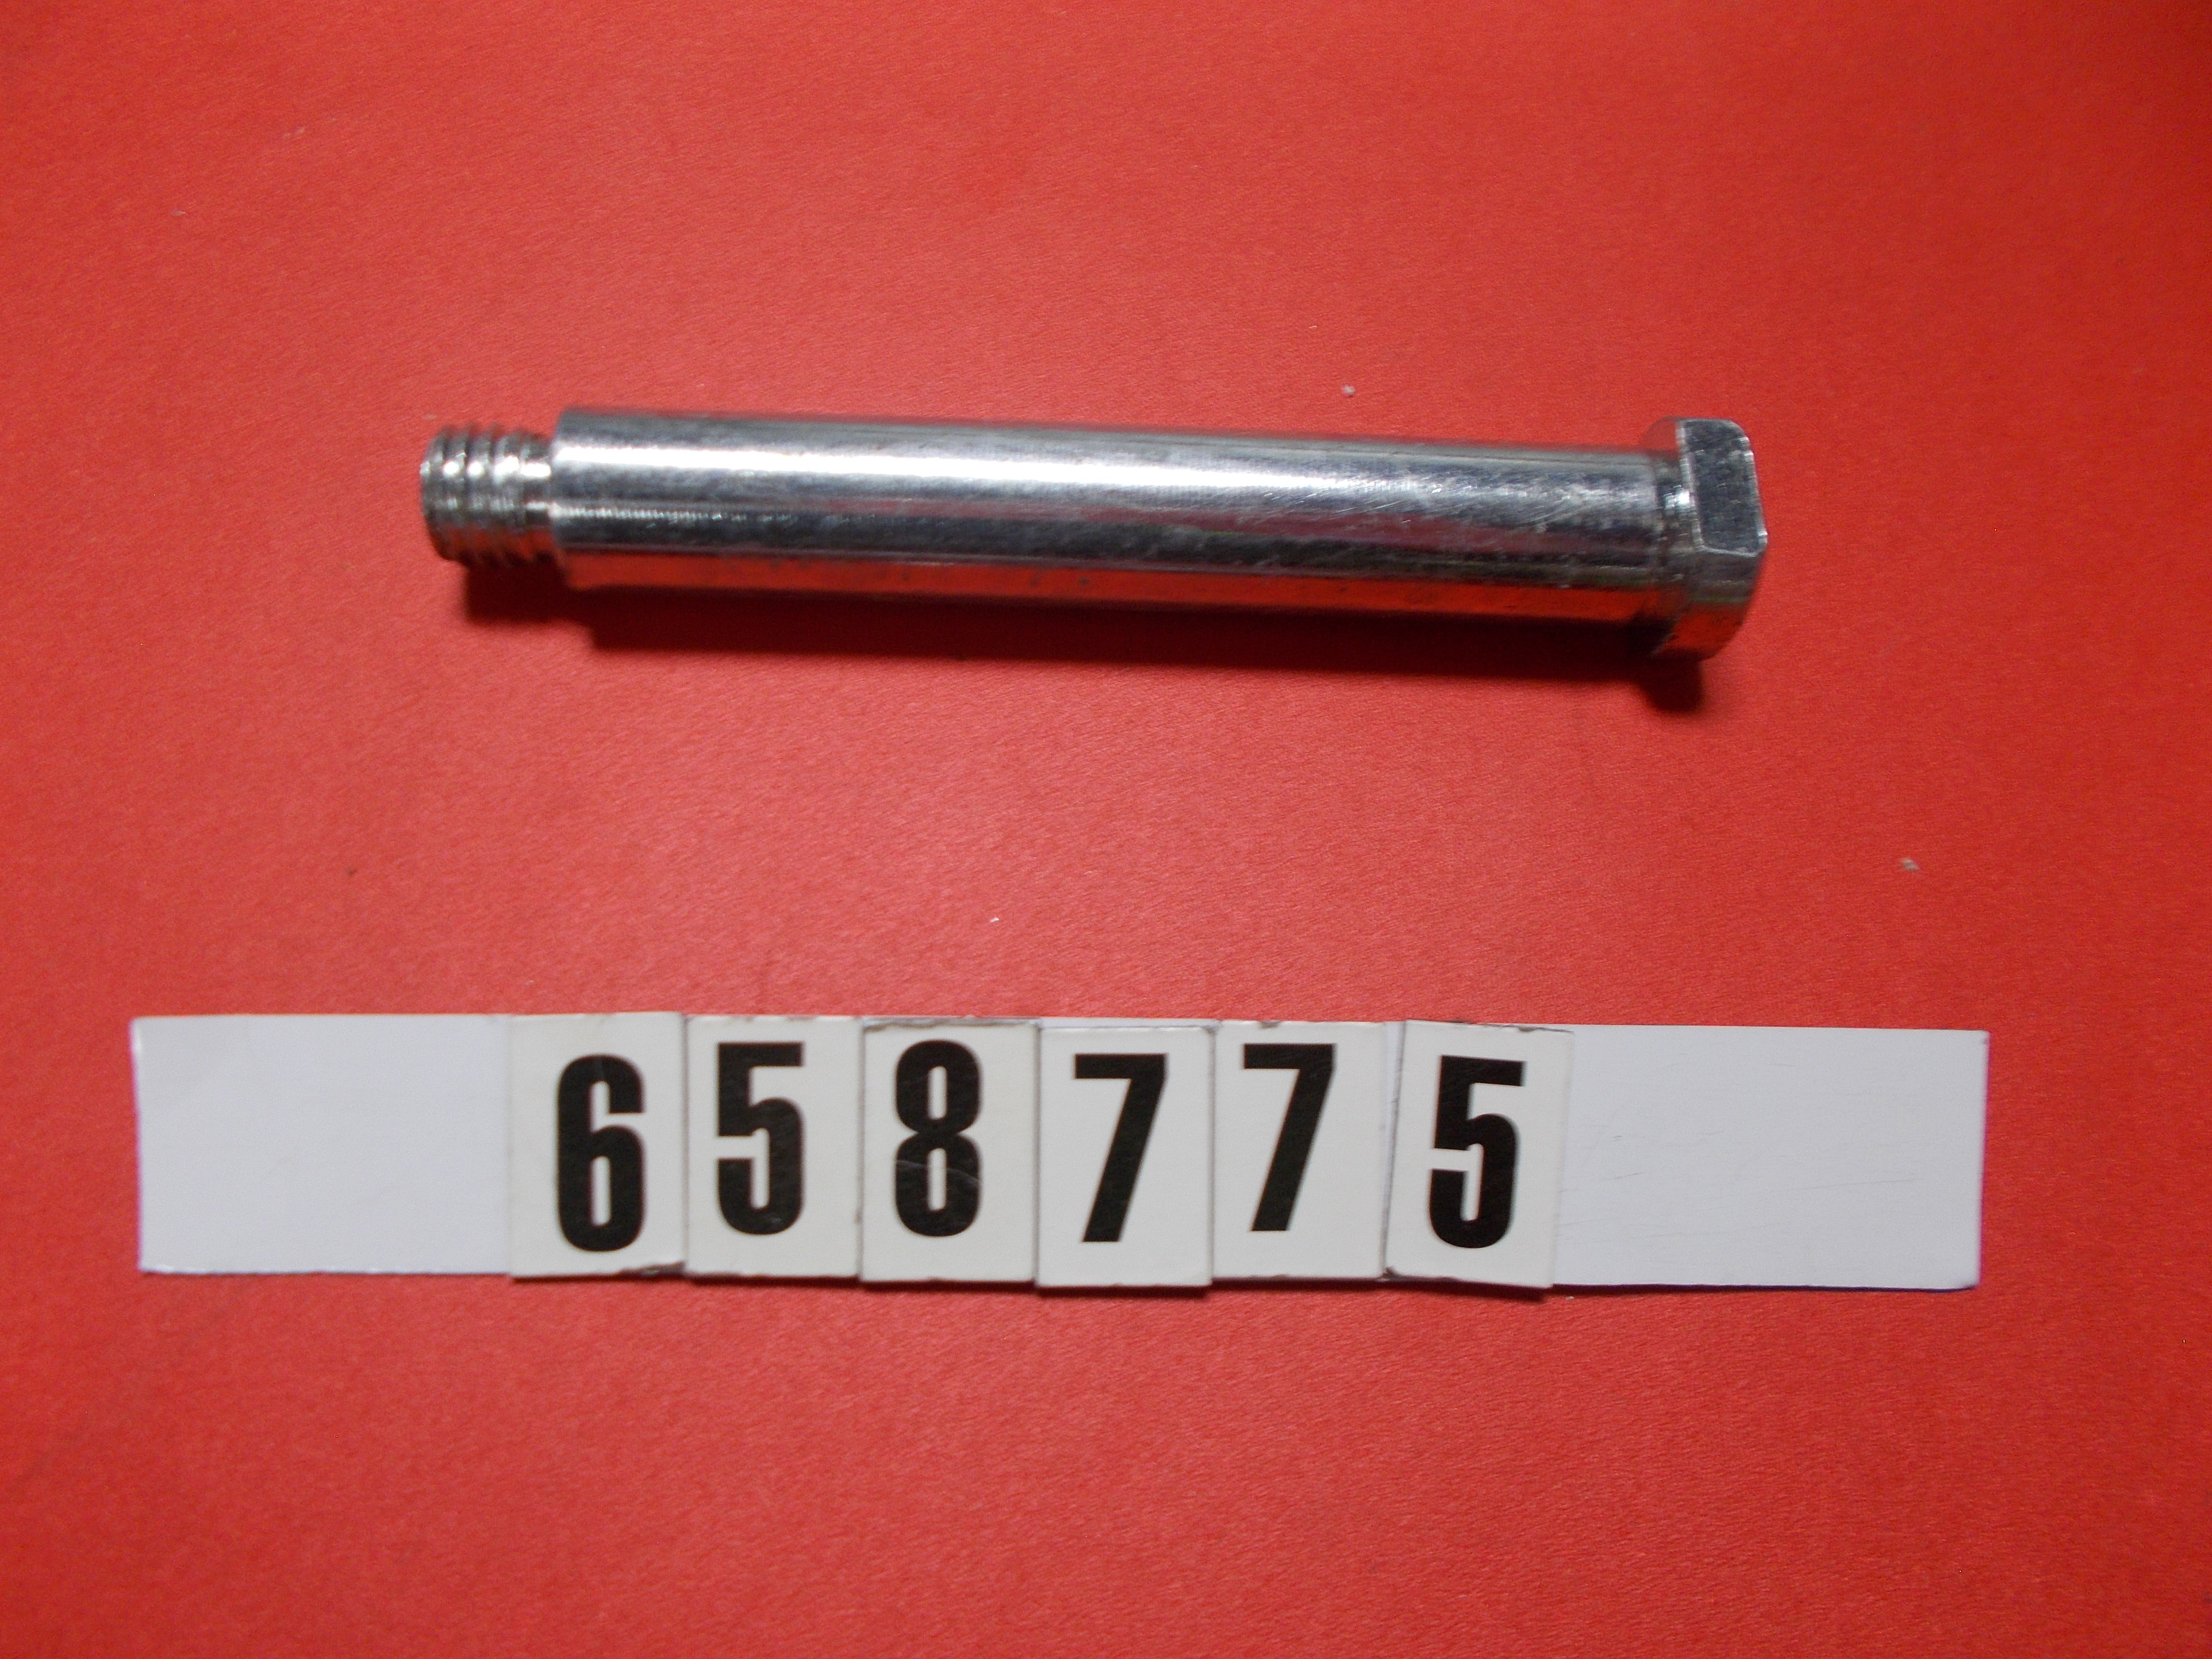 "ACTUATOR-PIN .62"" X 4.3"" W/OUT GREASE ZERC FITTING '16"